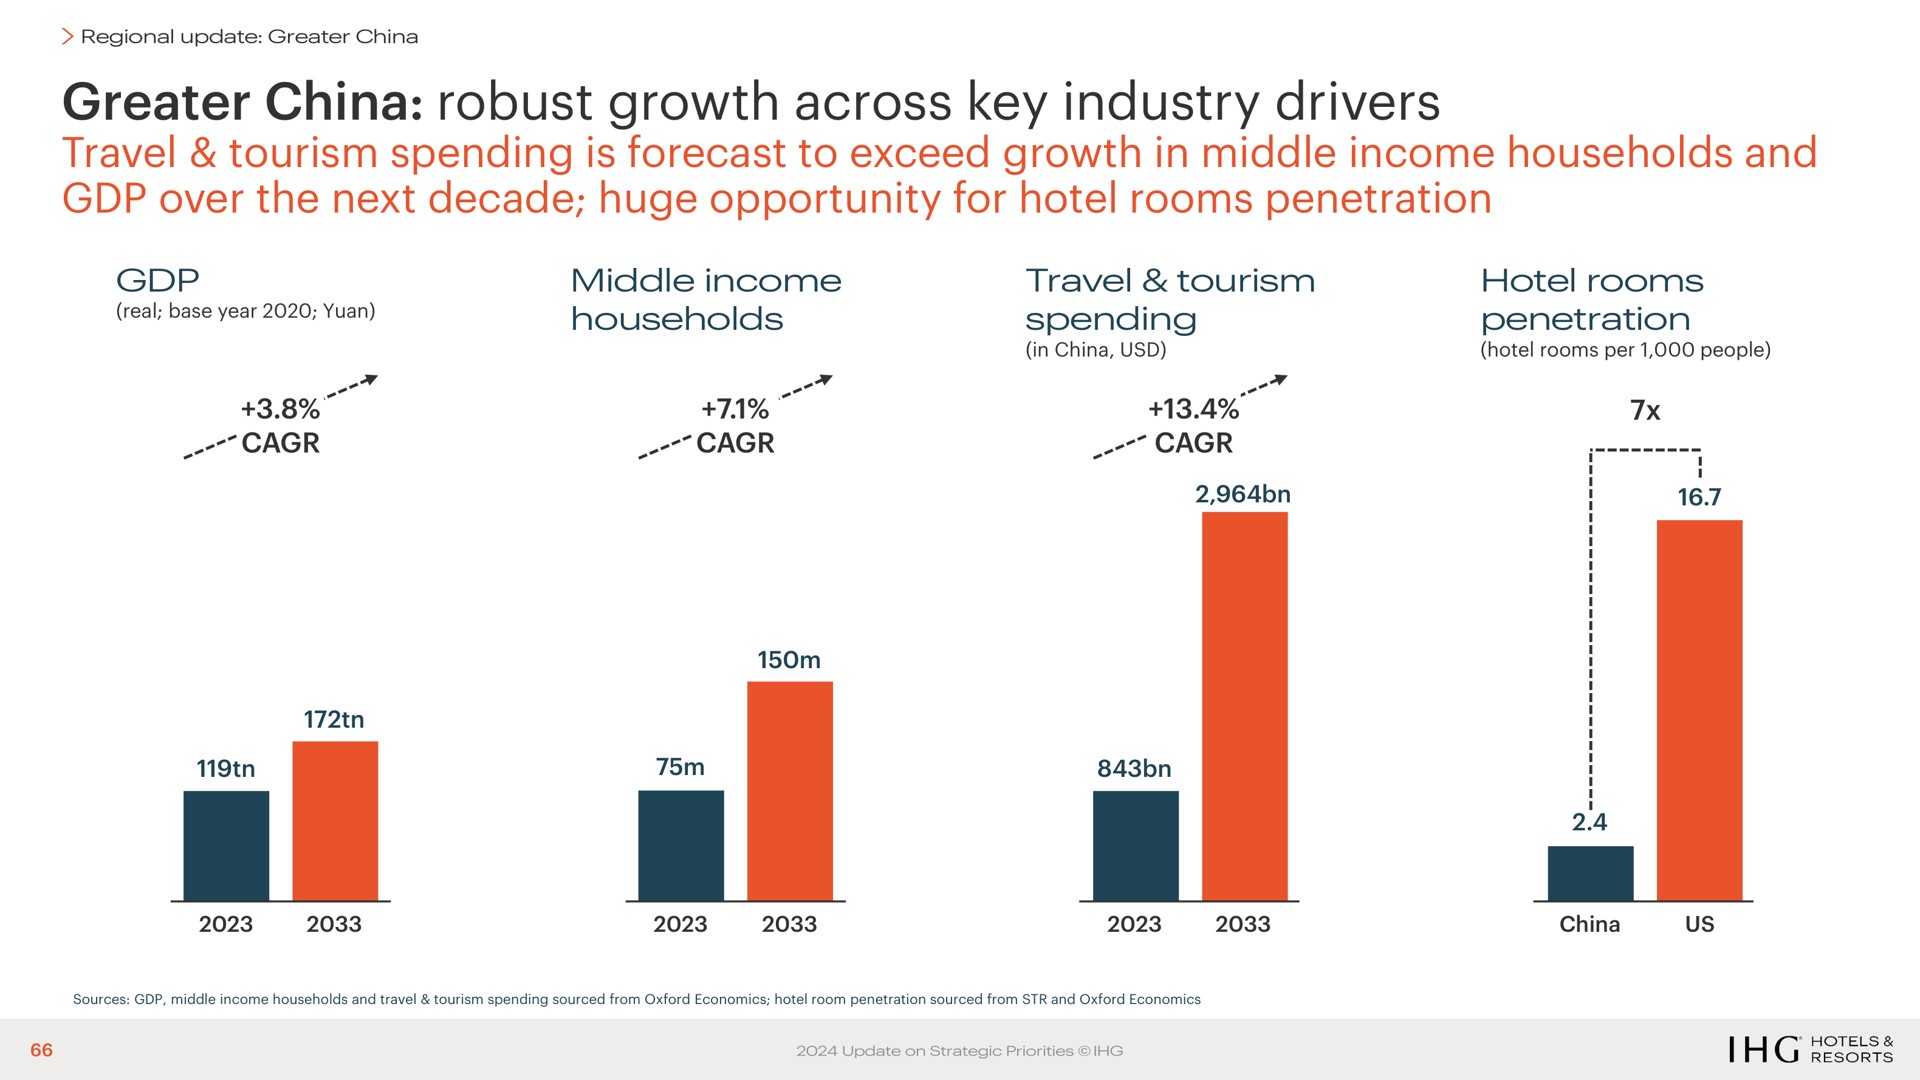 greater china robust growth across key industry drivers travel tourism spending is forecast to exceed growth in middle income households and over the next decade huge opportunity for hotel rooms penetration | IHG Hotels